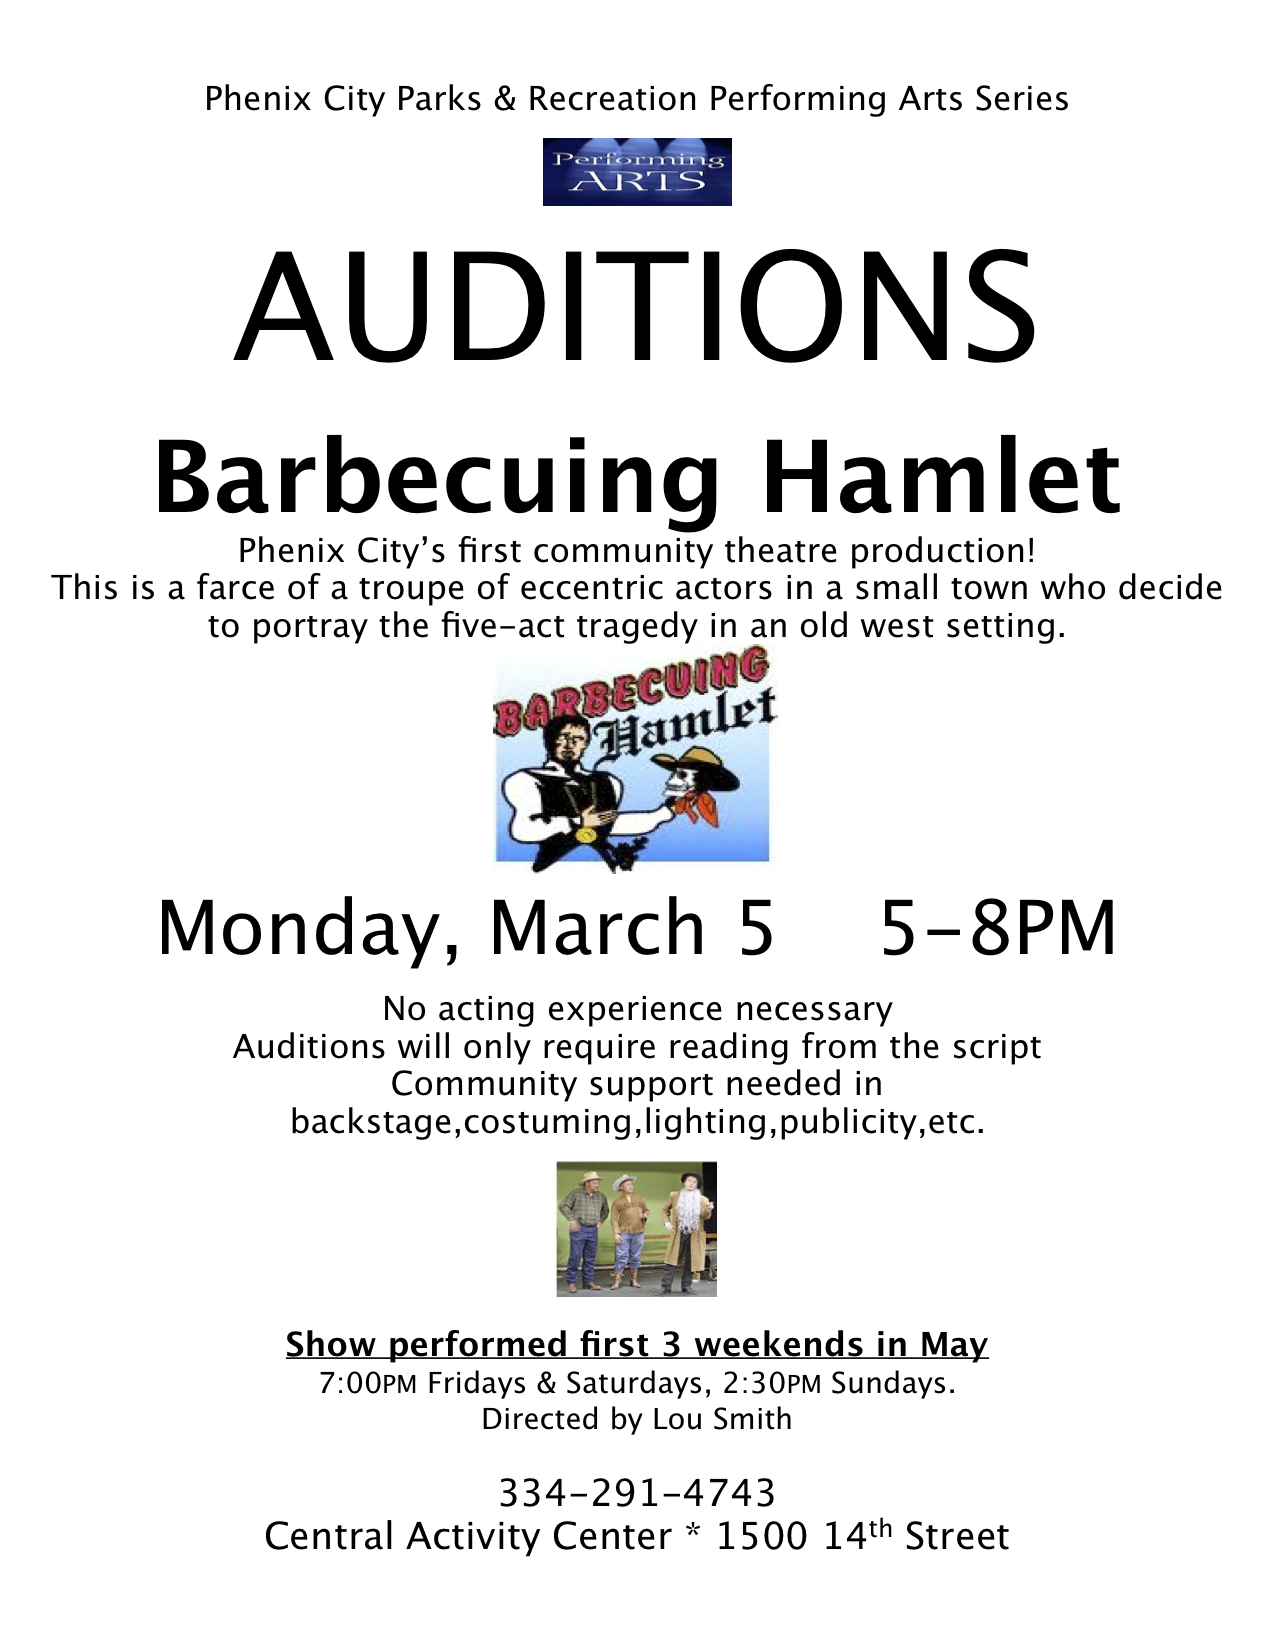 Auditions for Barbecuing Hamlet